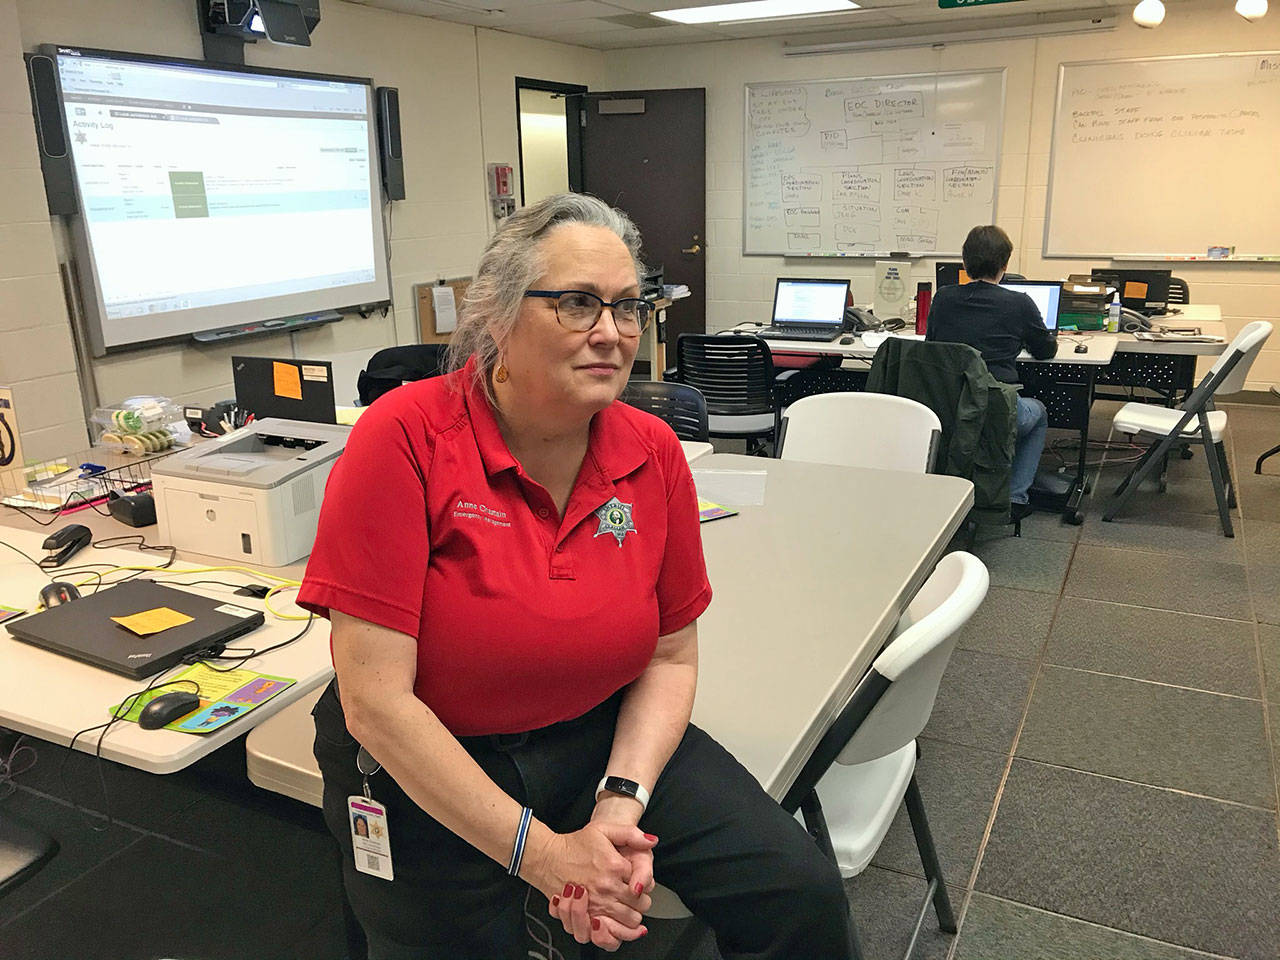 Anne Chastain, Clallam County Emergency Management Center coordinator, staffing the EOC on Monday, March 2, 2020, said only people who have flu- or cold-like symptoms should wear surgical masks in public, not people who are otherwise healthy. (Paul Gottlieb/Peninsula Daily News)